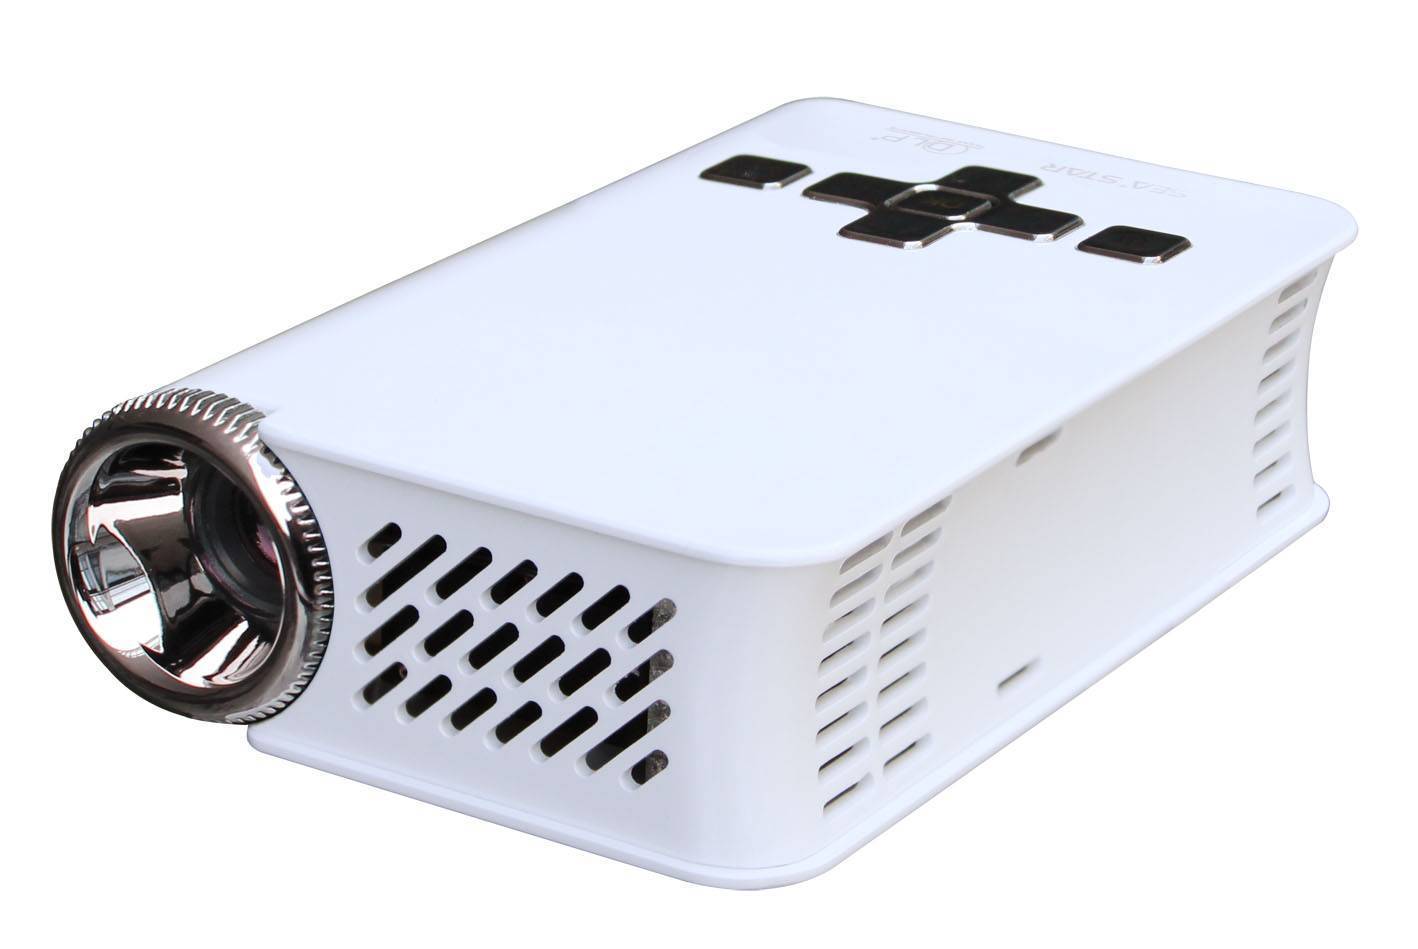 7 best pico projectors (jan. 2021) – reviews & buying guide